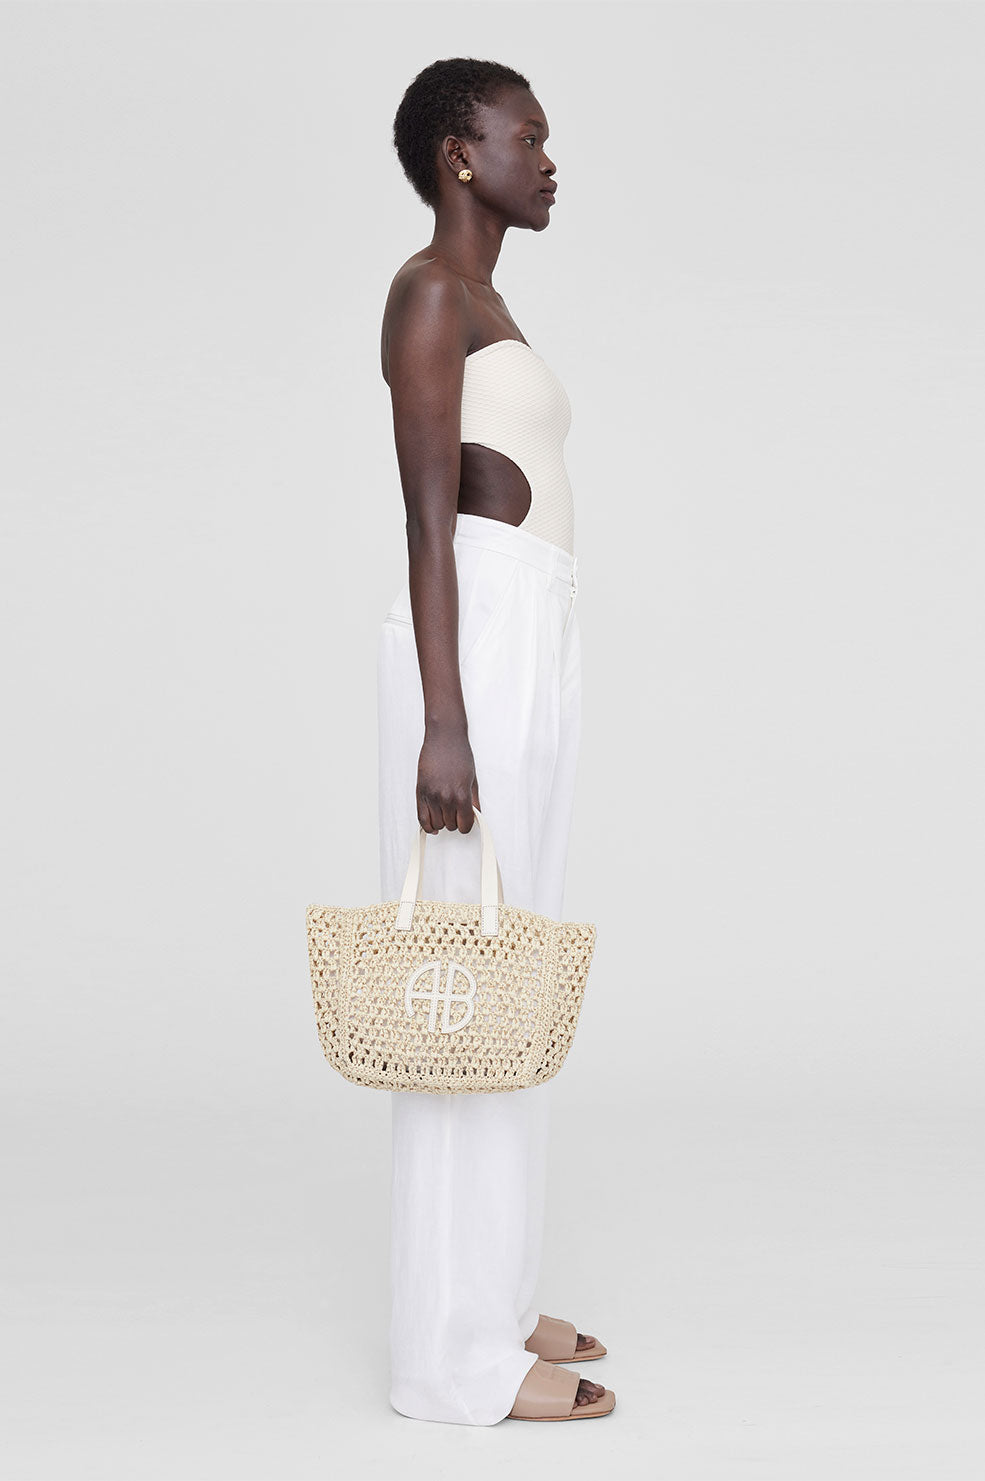 The Small Rio Tote by Anine Bing is a vacation essential made from an  unlined woven seagrass material. This seasonal style features two…